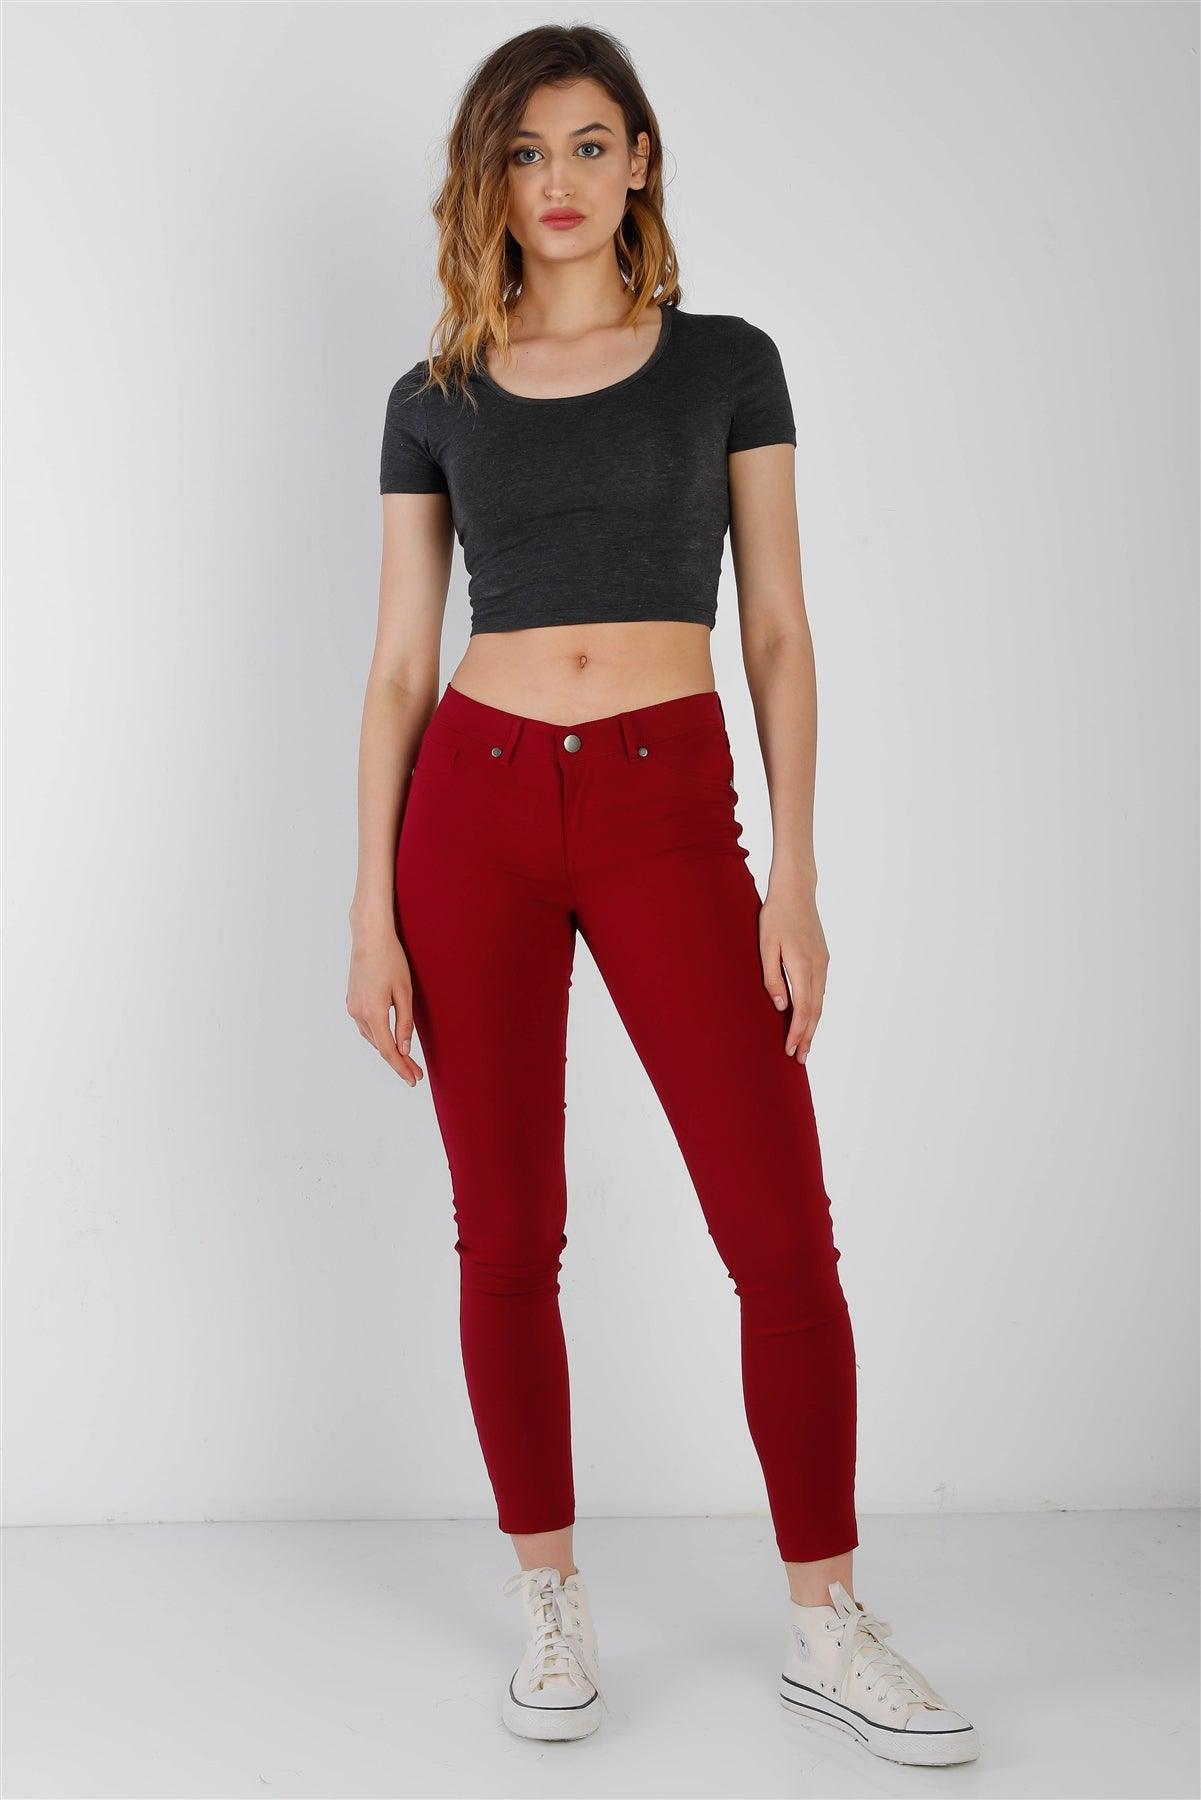 Ruby Red Contrast Button Mid Rise Skinny Pants /2-2-2